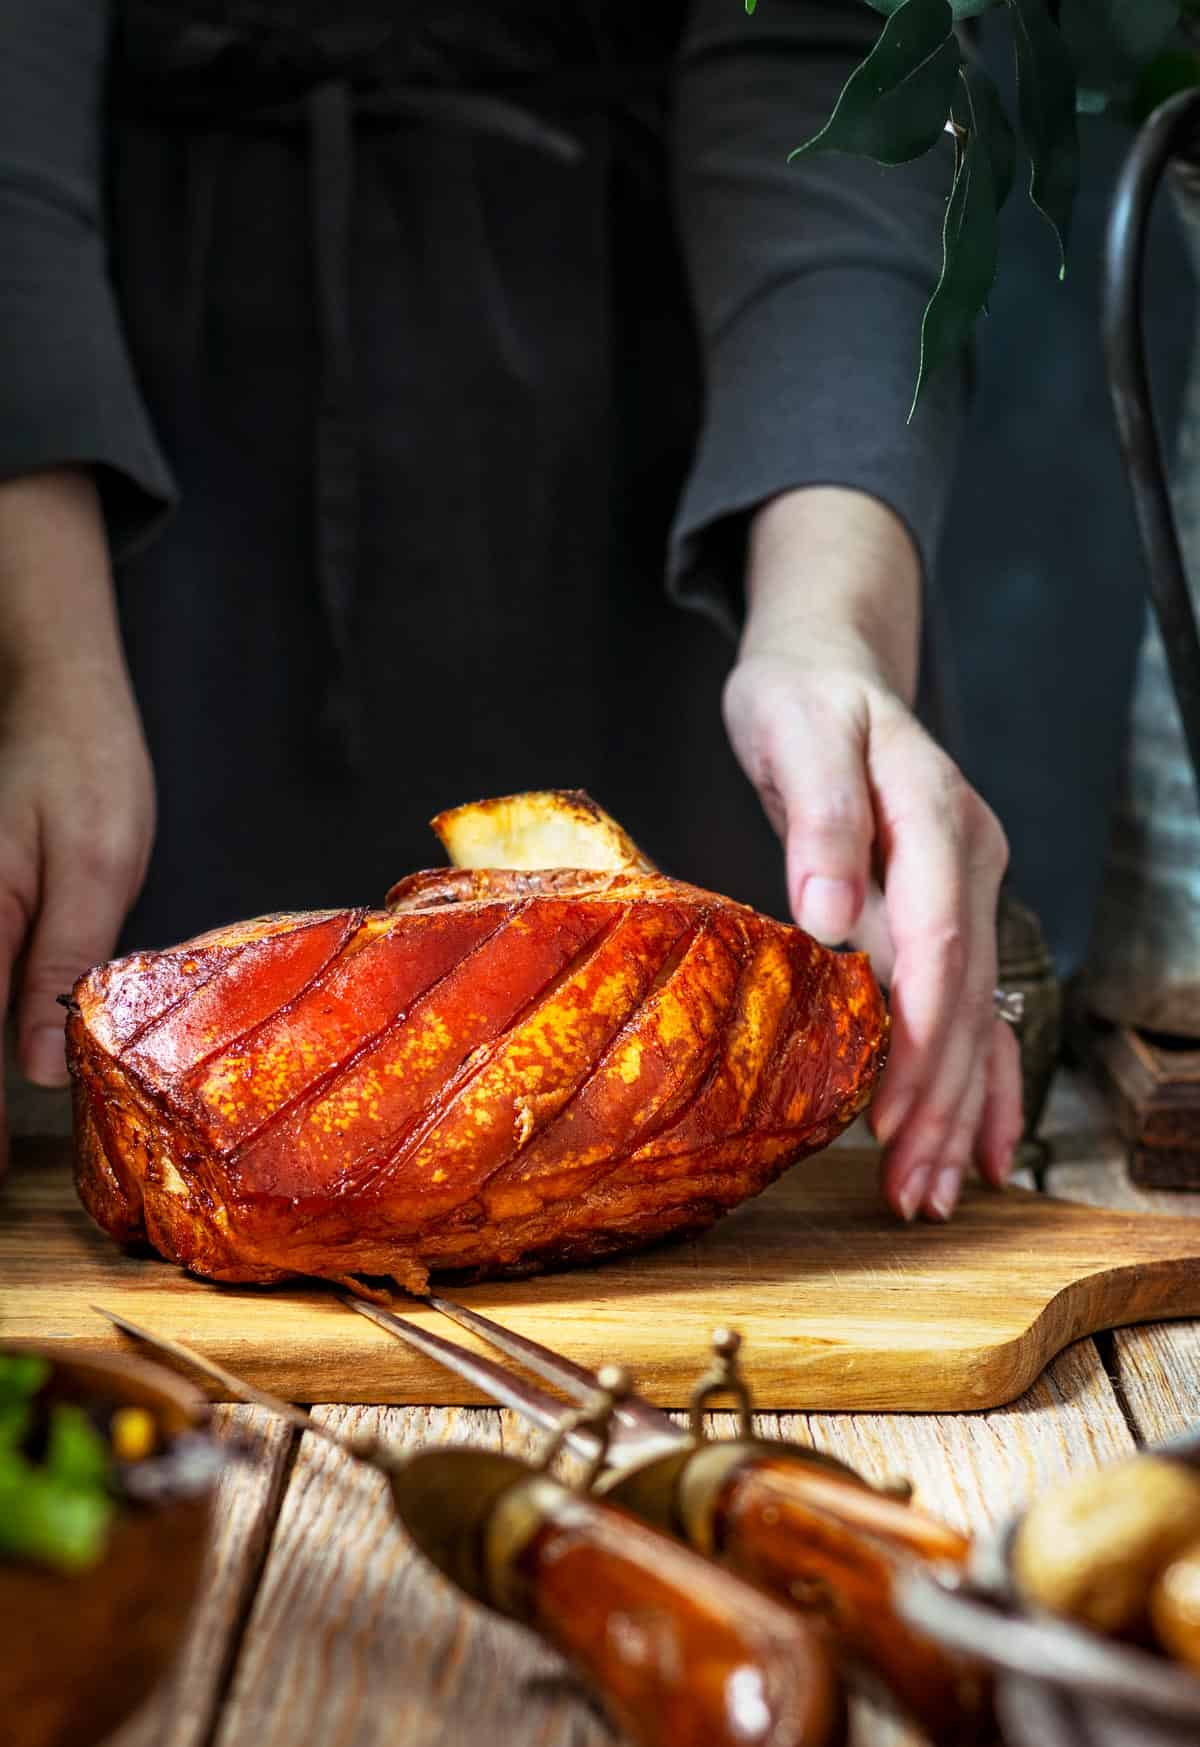 A person placing the pork roast on a table.